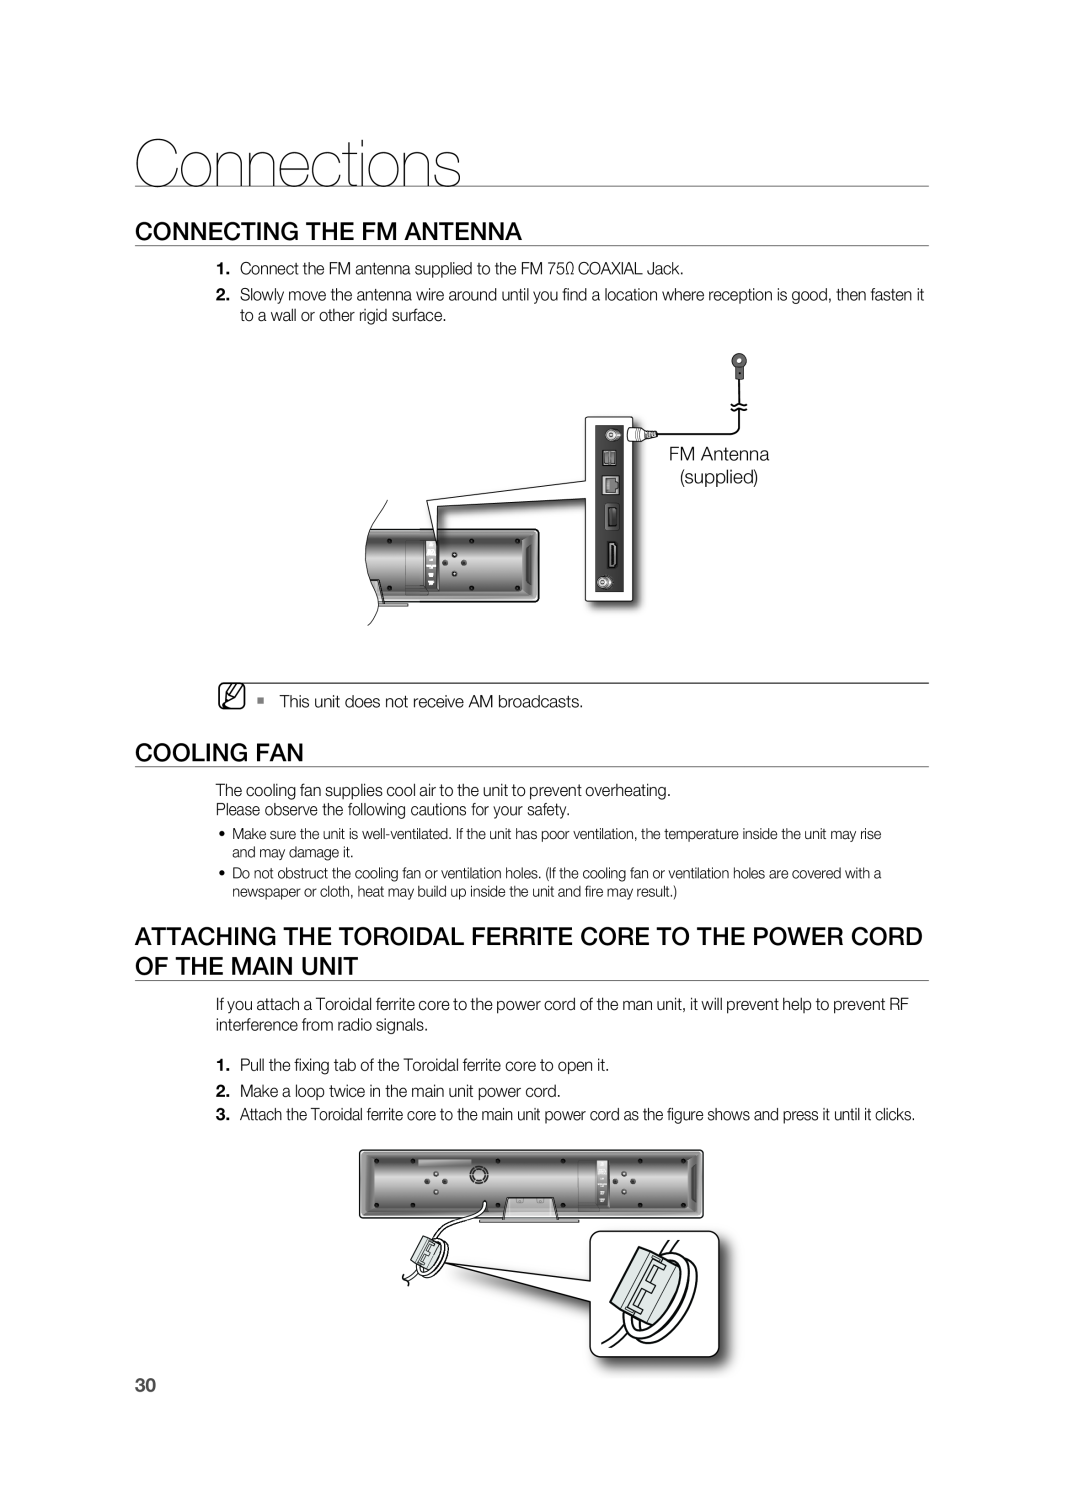 Samsung HT-BD8200 user manual Connecting The Fm Antenna, Cooling Fan, Connections, FM Antenna supplied 